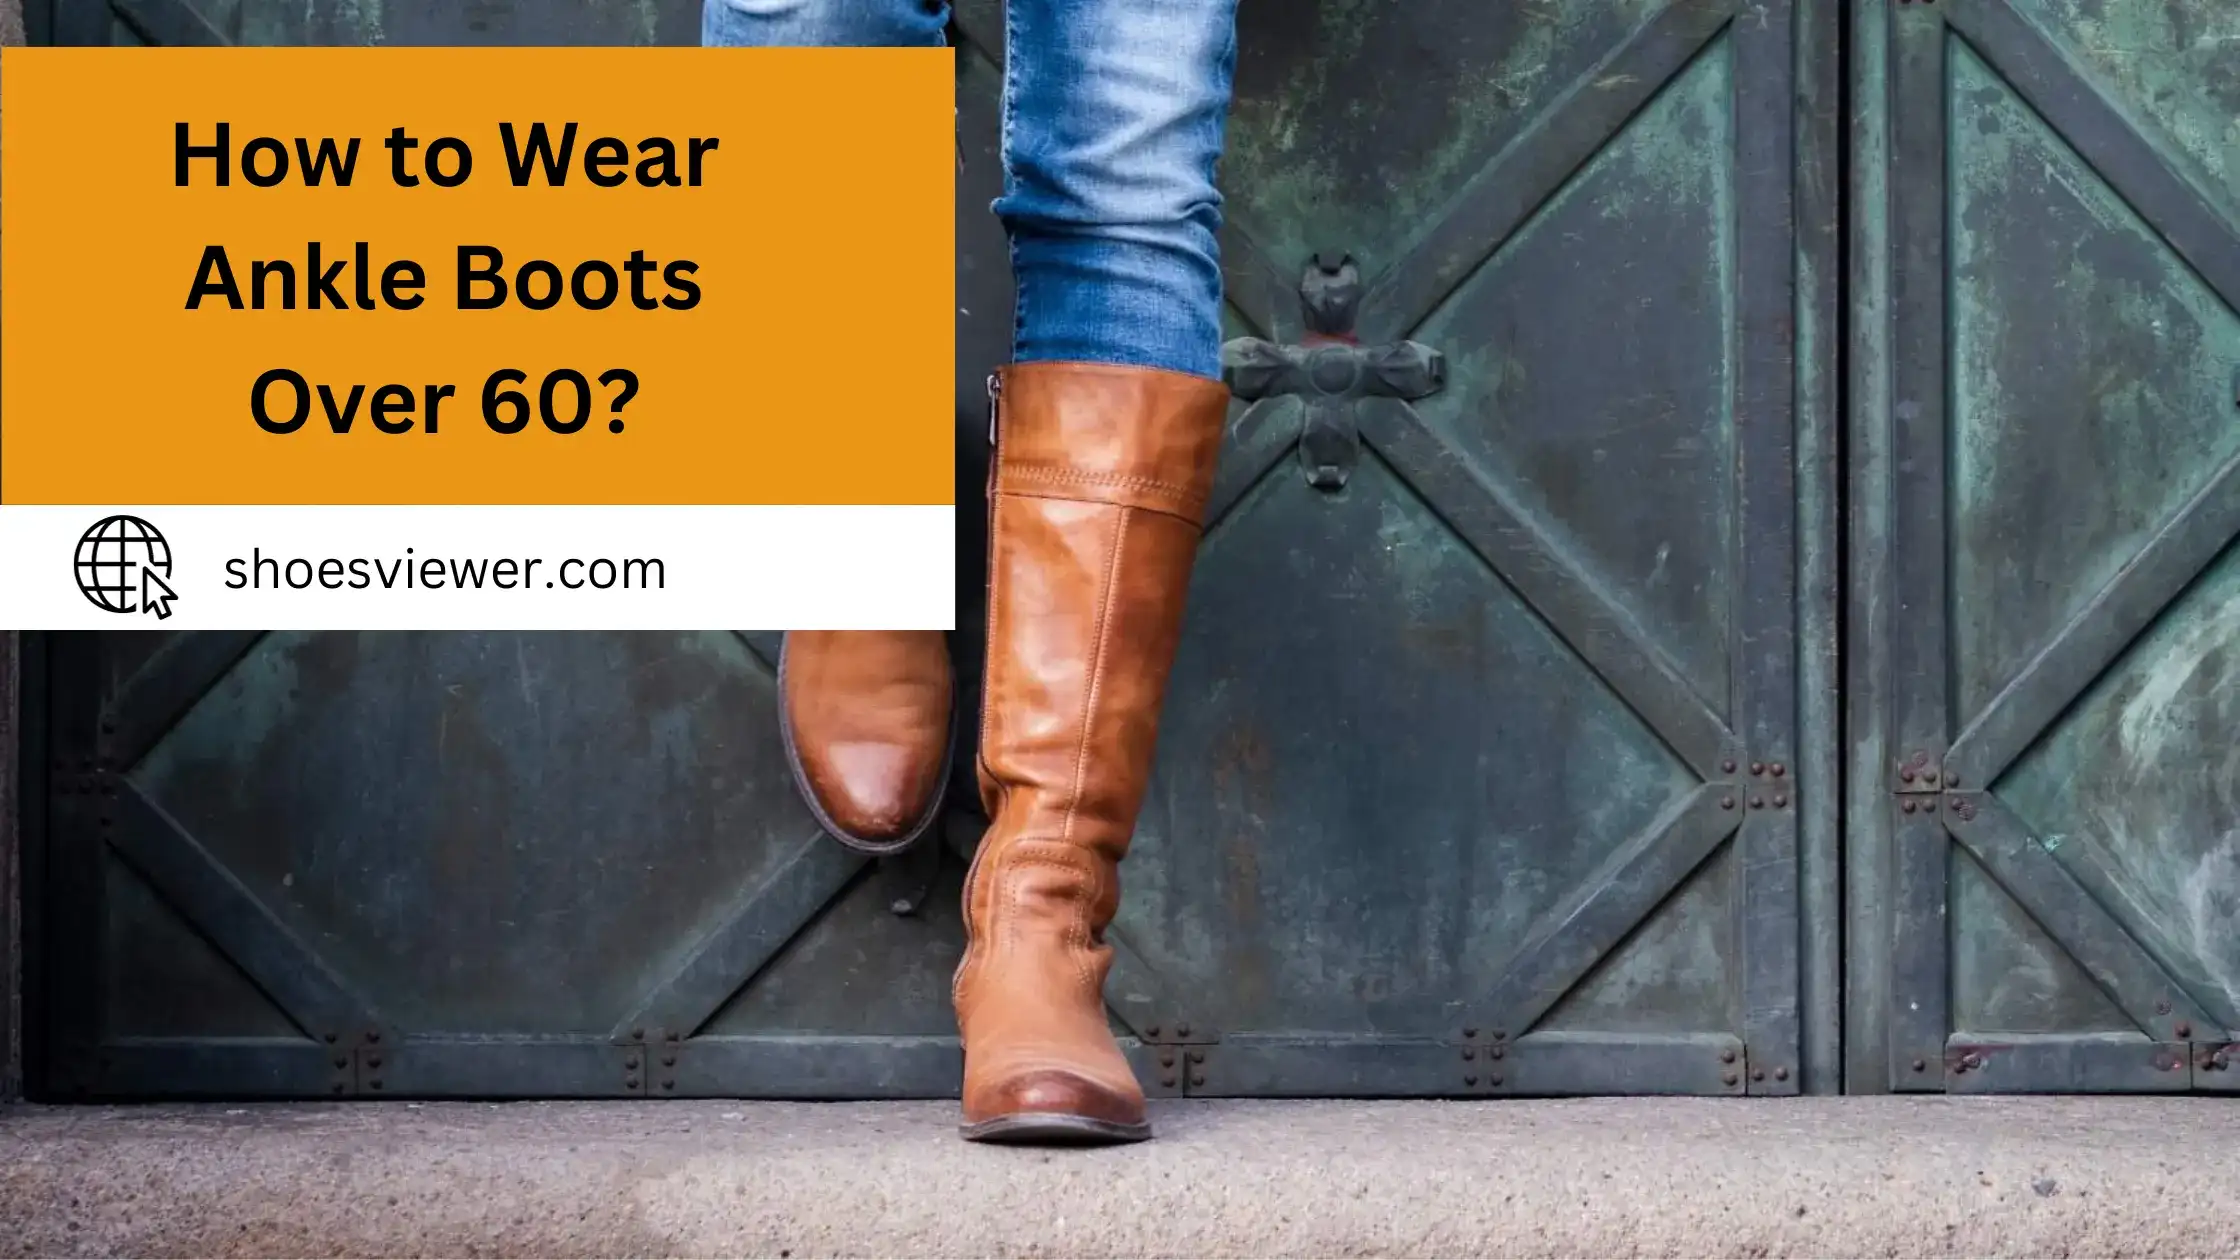 How to Wear Ankle Boots Over 60? Effective And Easiest Guide